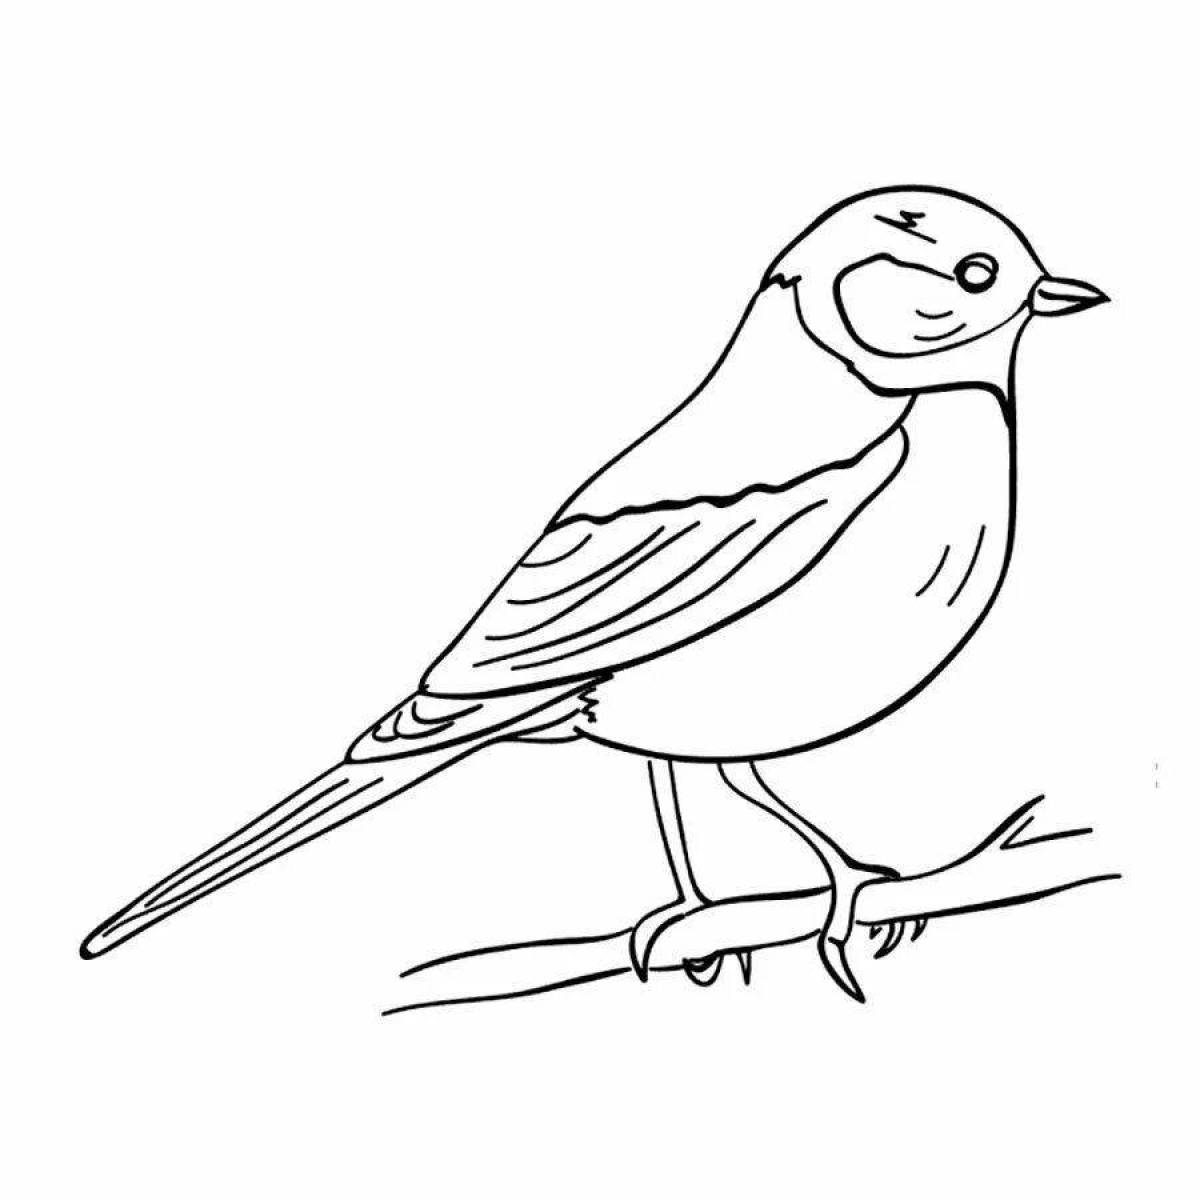 Great titmouse drawing for beginners